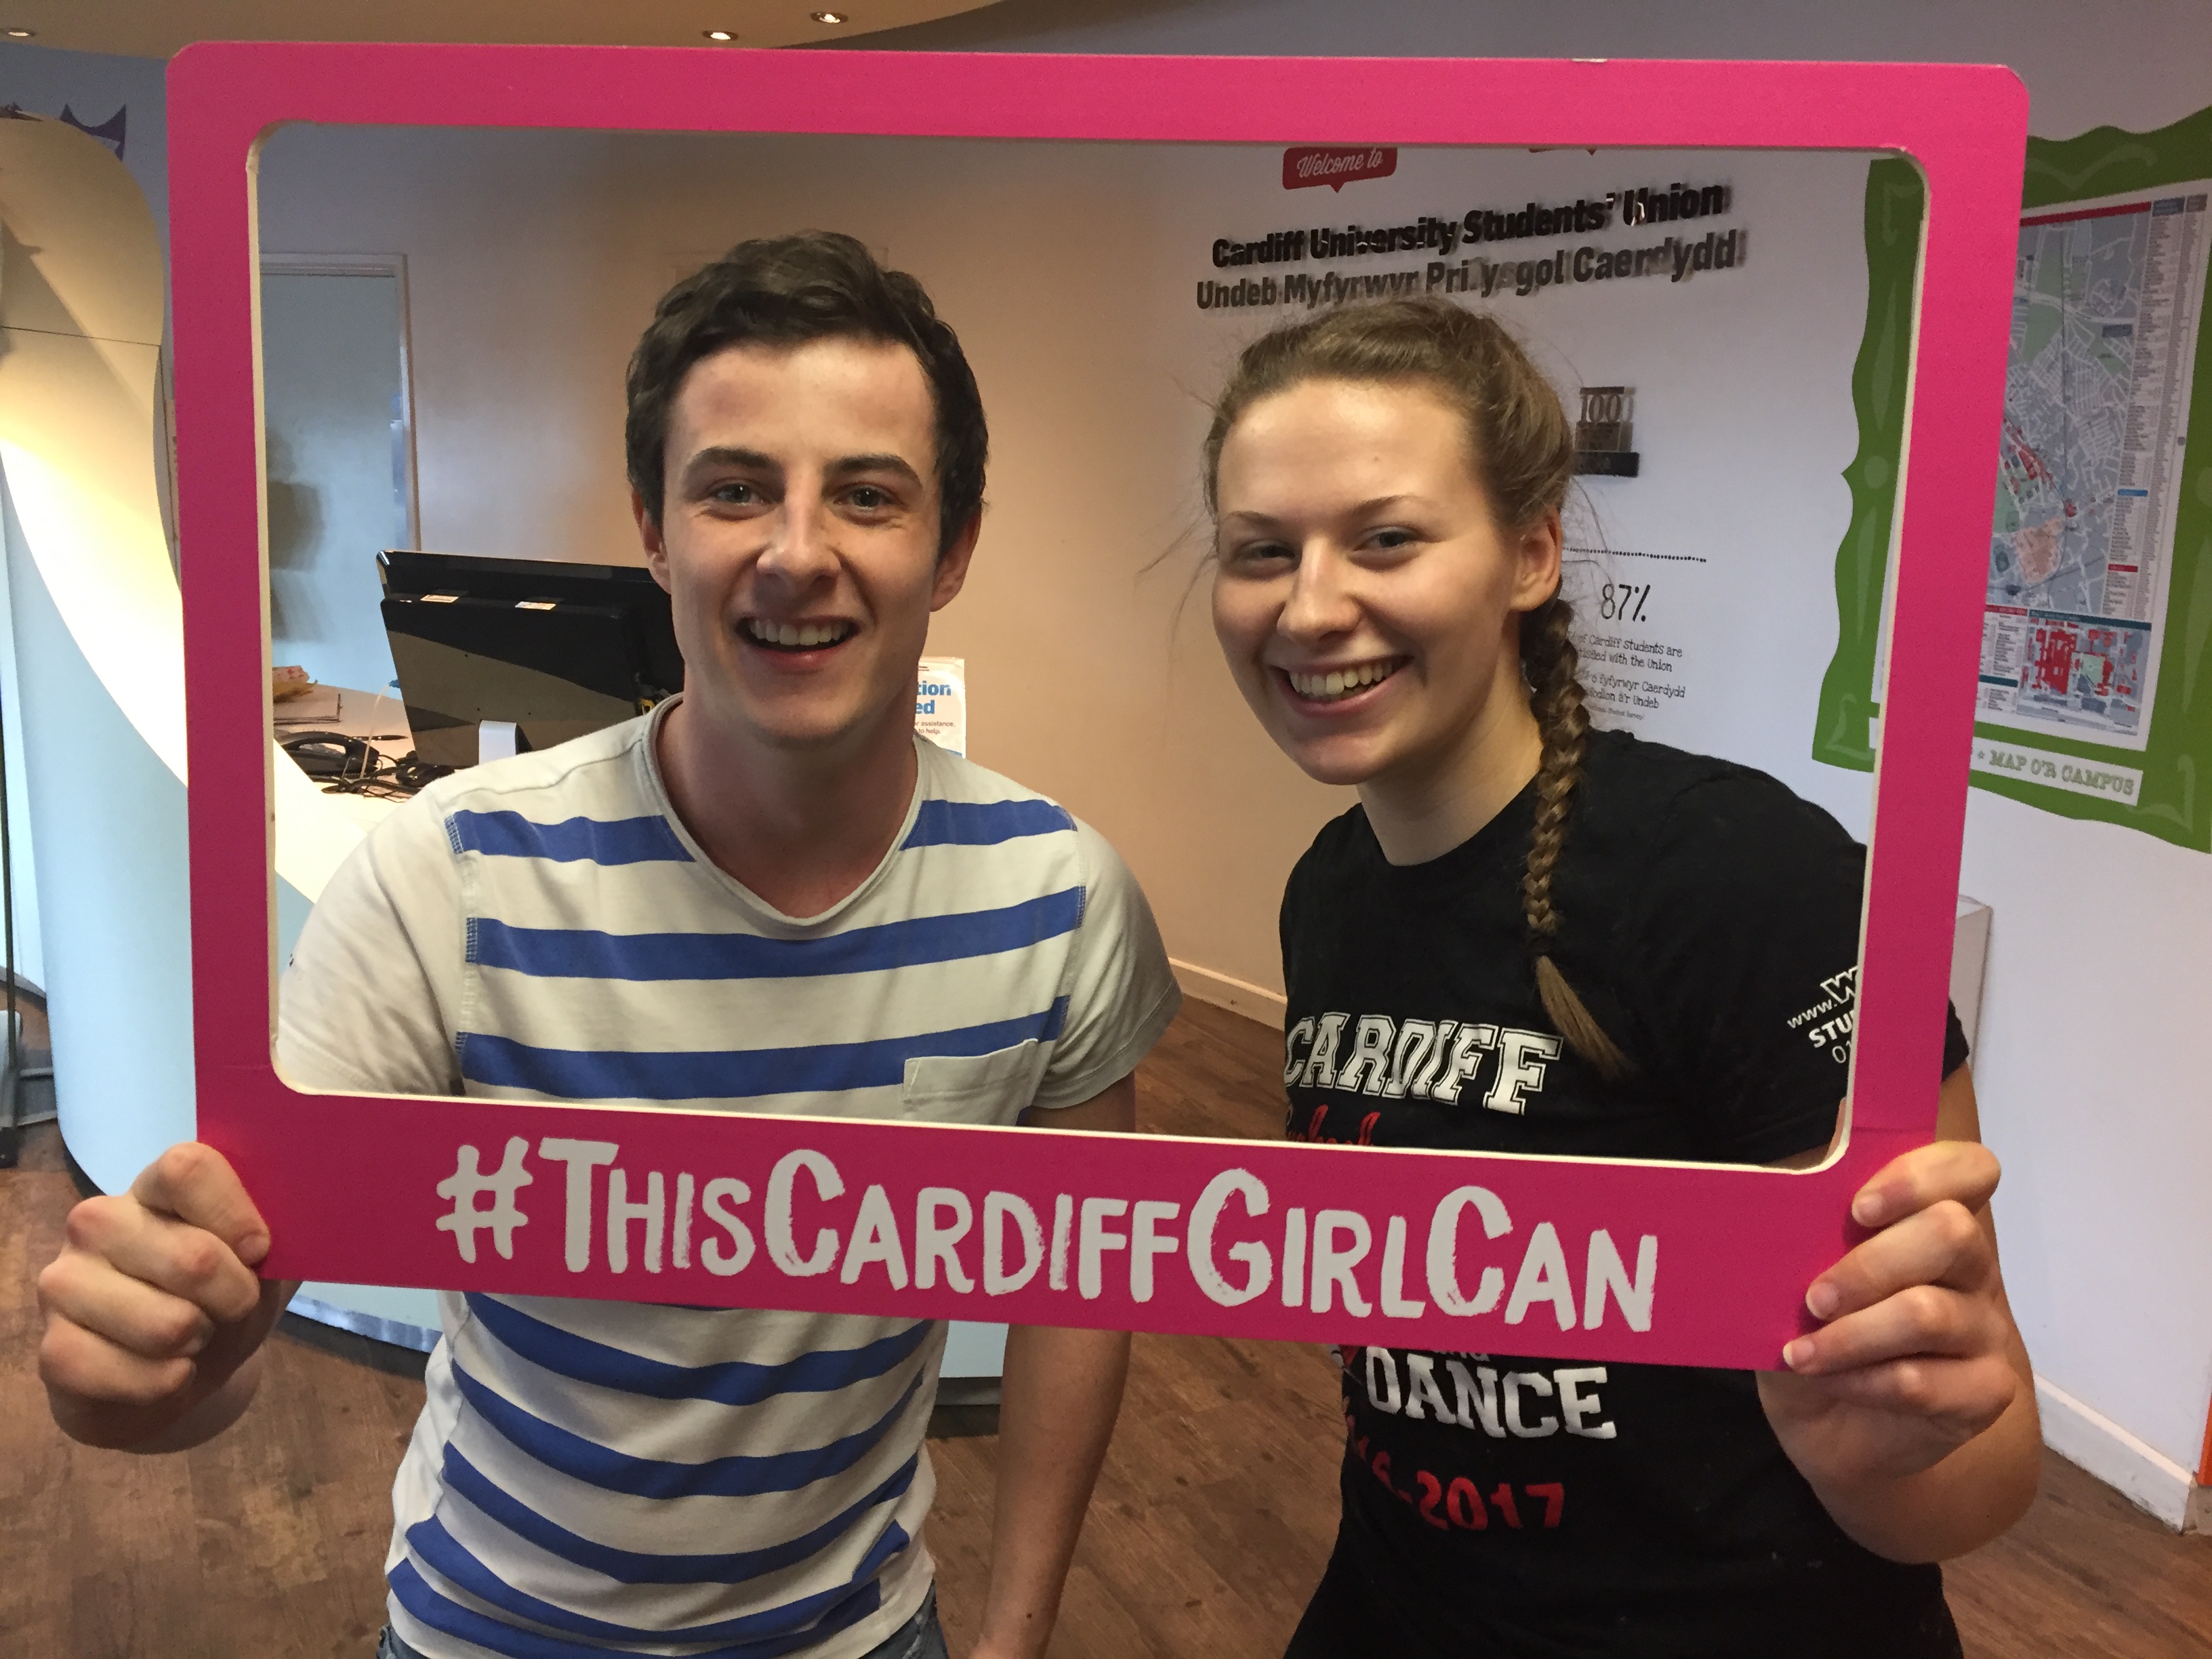 Elin Harding (right) with a supporter at #ThiscardiffGirlCan campaign